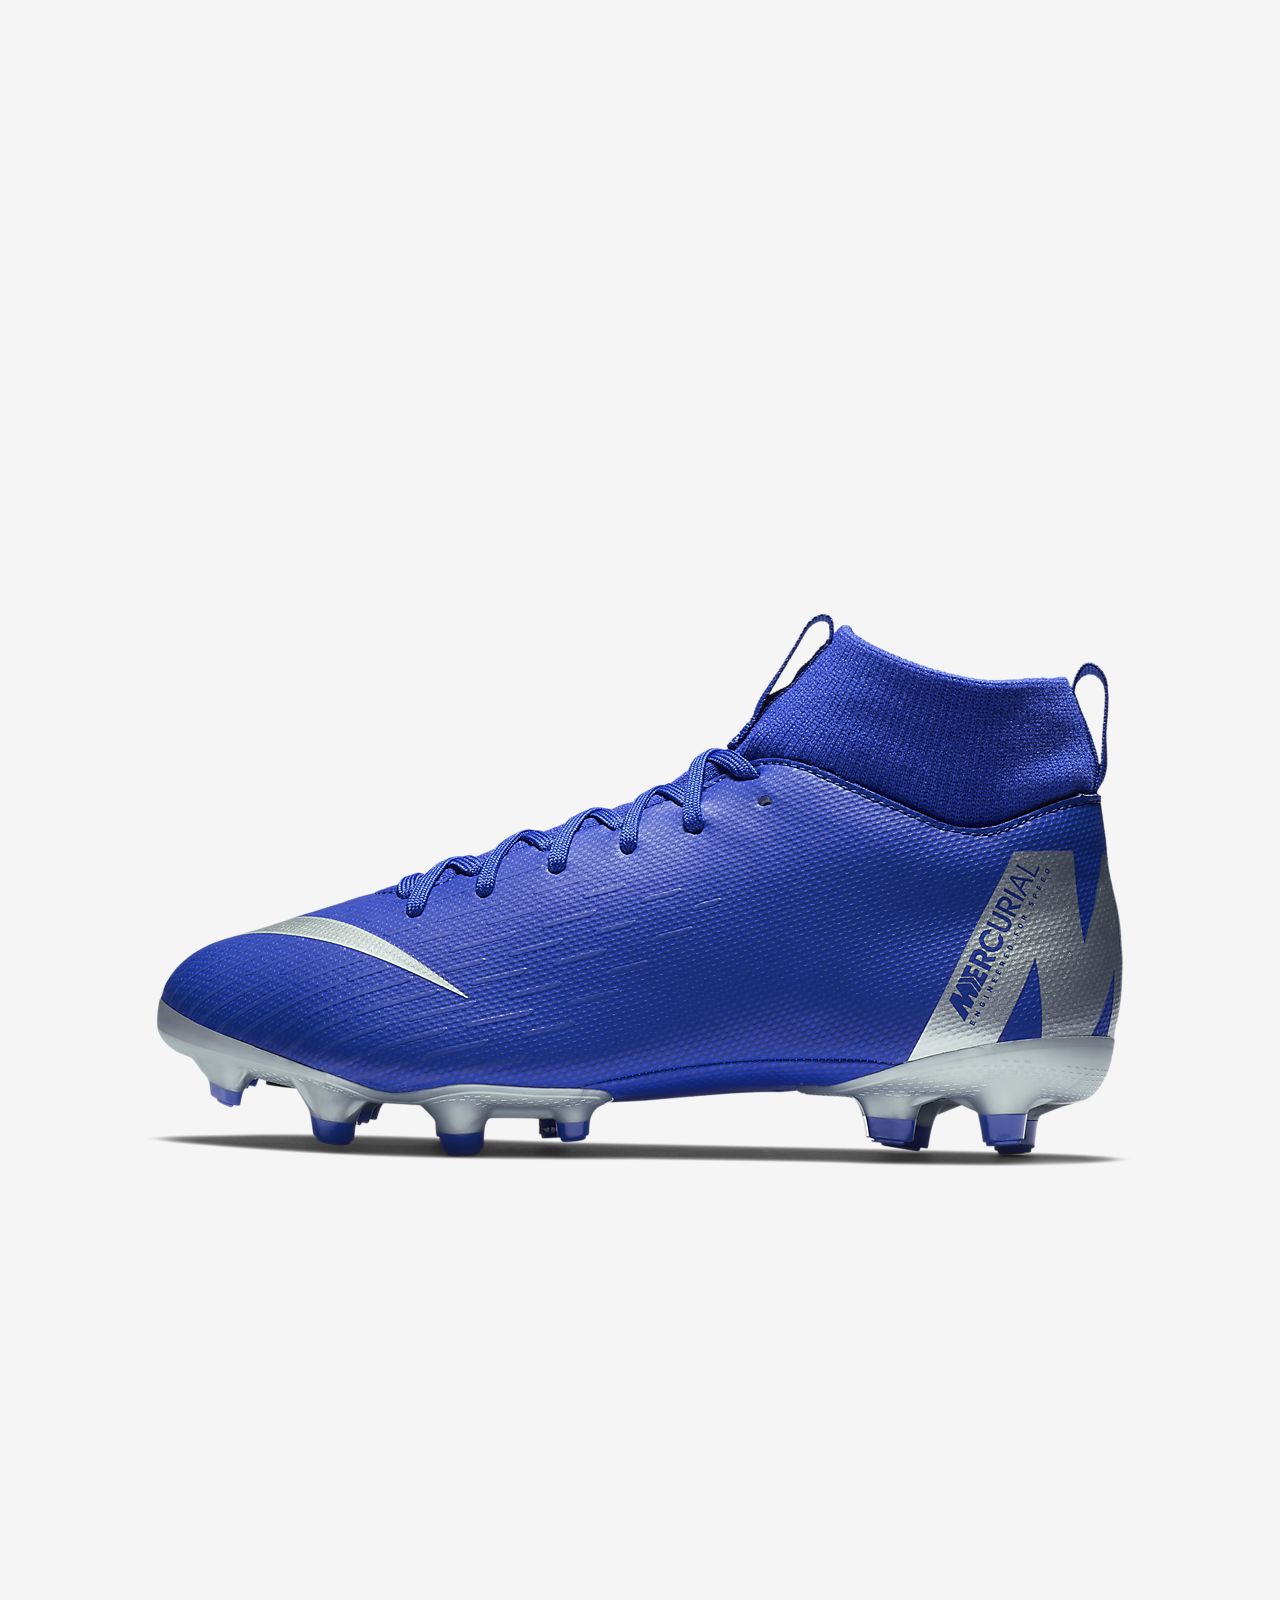 Nike Mercurial Superfly VI Elite FG Pro Direct Rugby